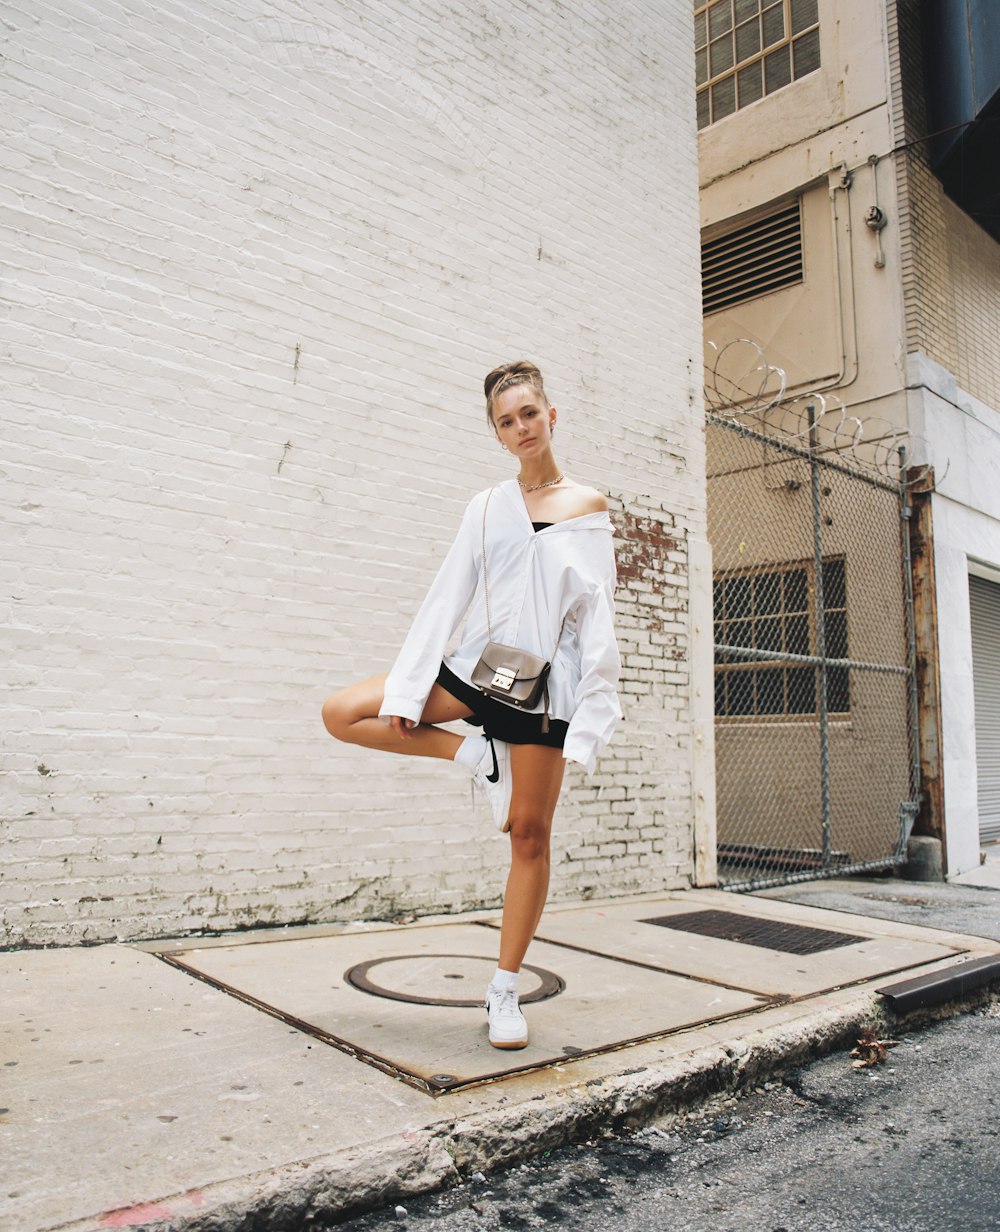 Woman in white t-shirt and black shorts standing on gray concrete floor  during daytime photo – Free Atlanta Image on Unsplash